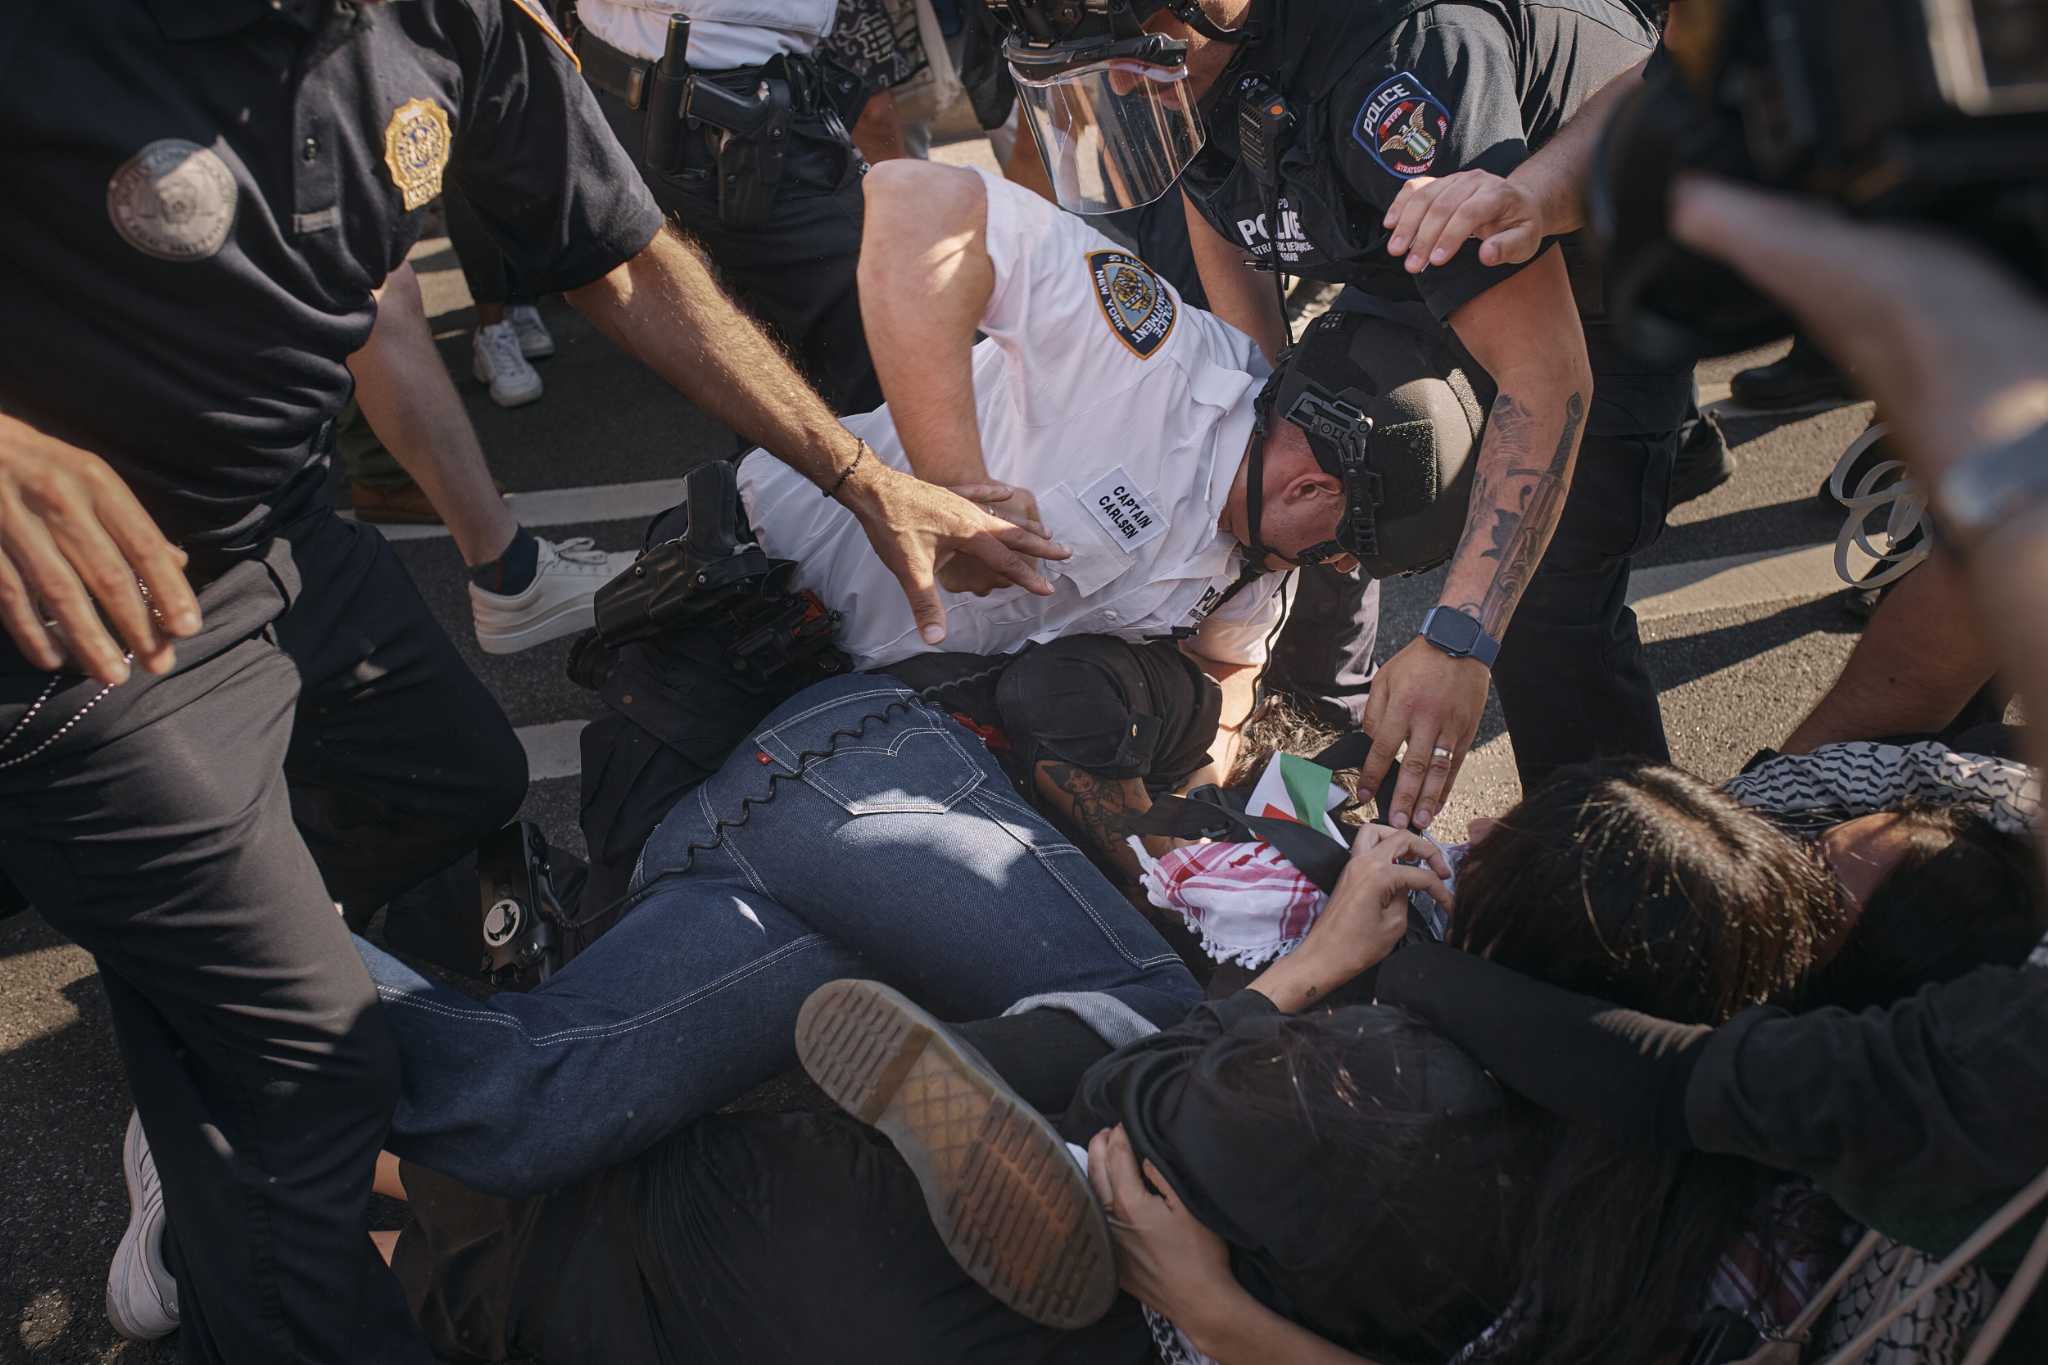 34 taken into custody after pro-Palestinian protest at Brooklyn Museum, artwork damage reported